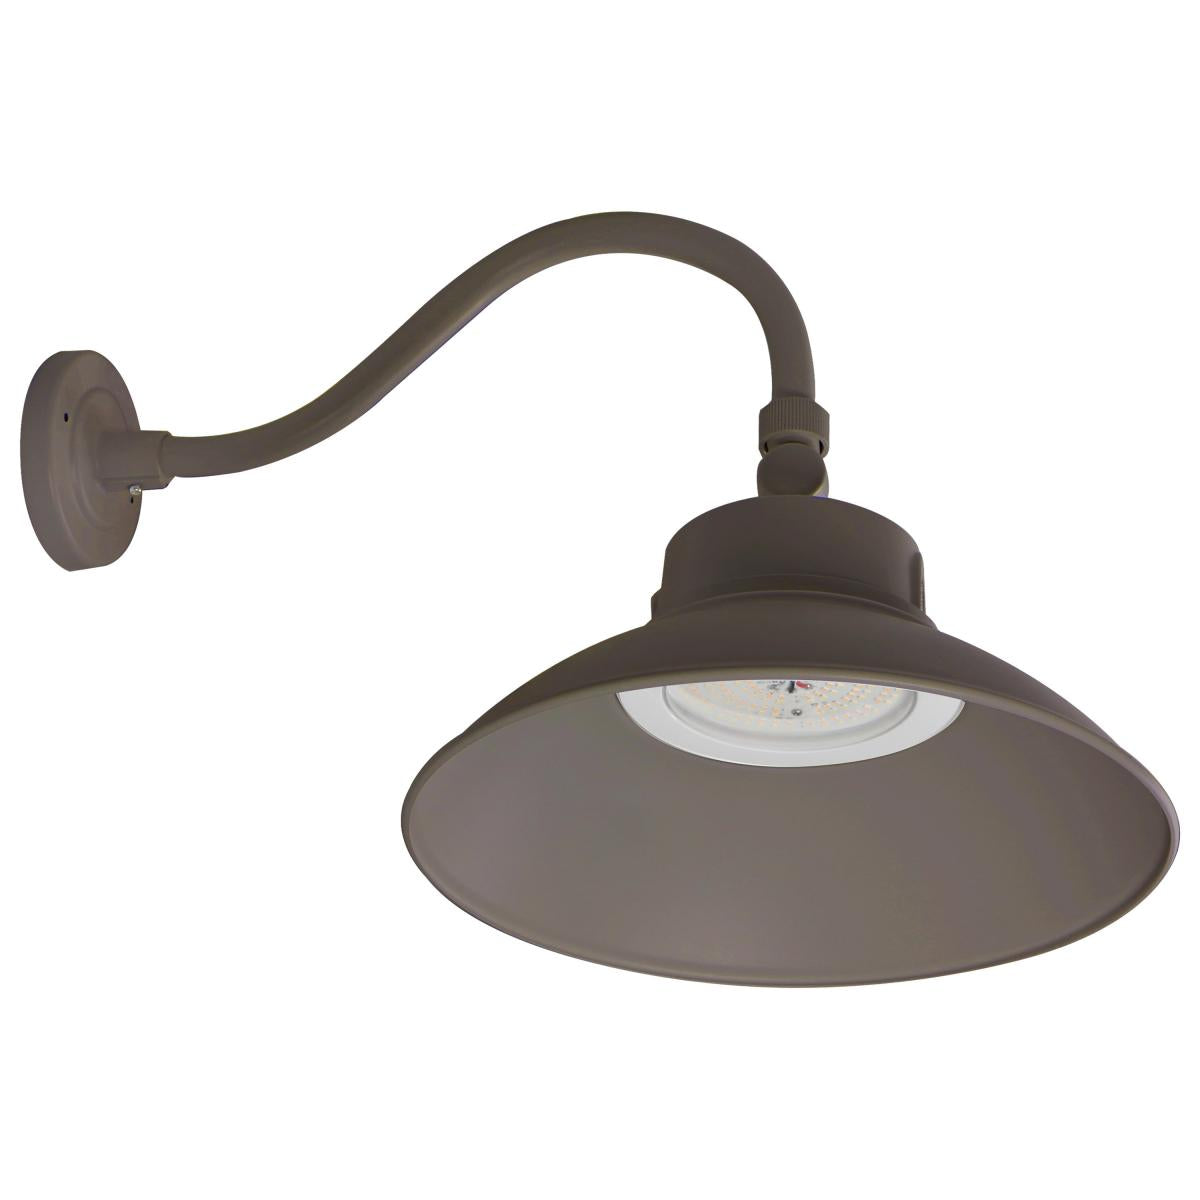 LED Gooseneck Fixture, Wattage and CCT Selectable, 5500 Lumen Max, Integrated Photocell, 120-277V, Finish Bronze